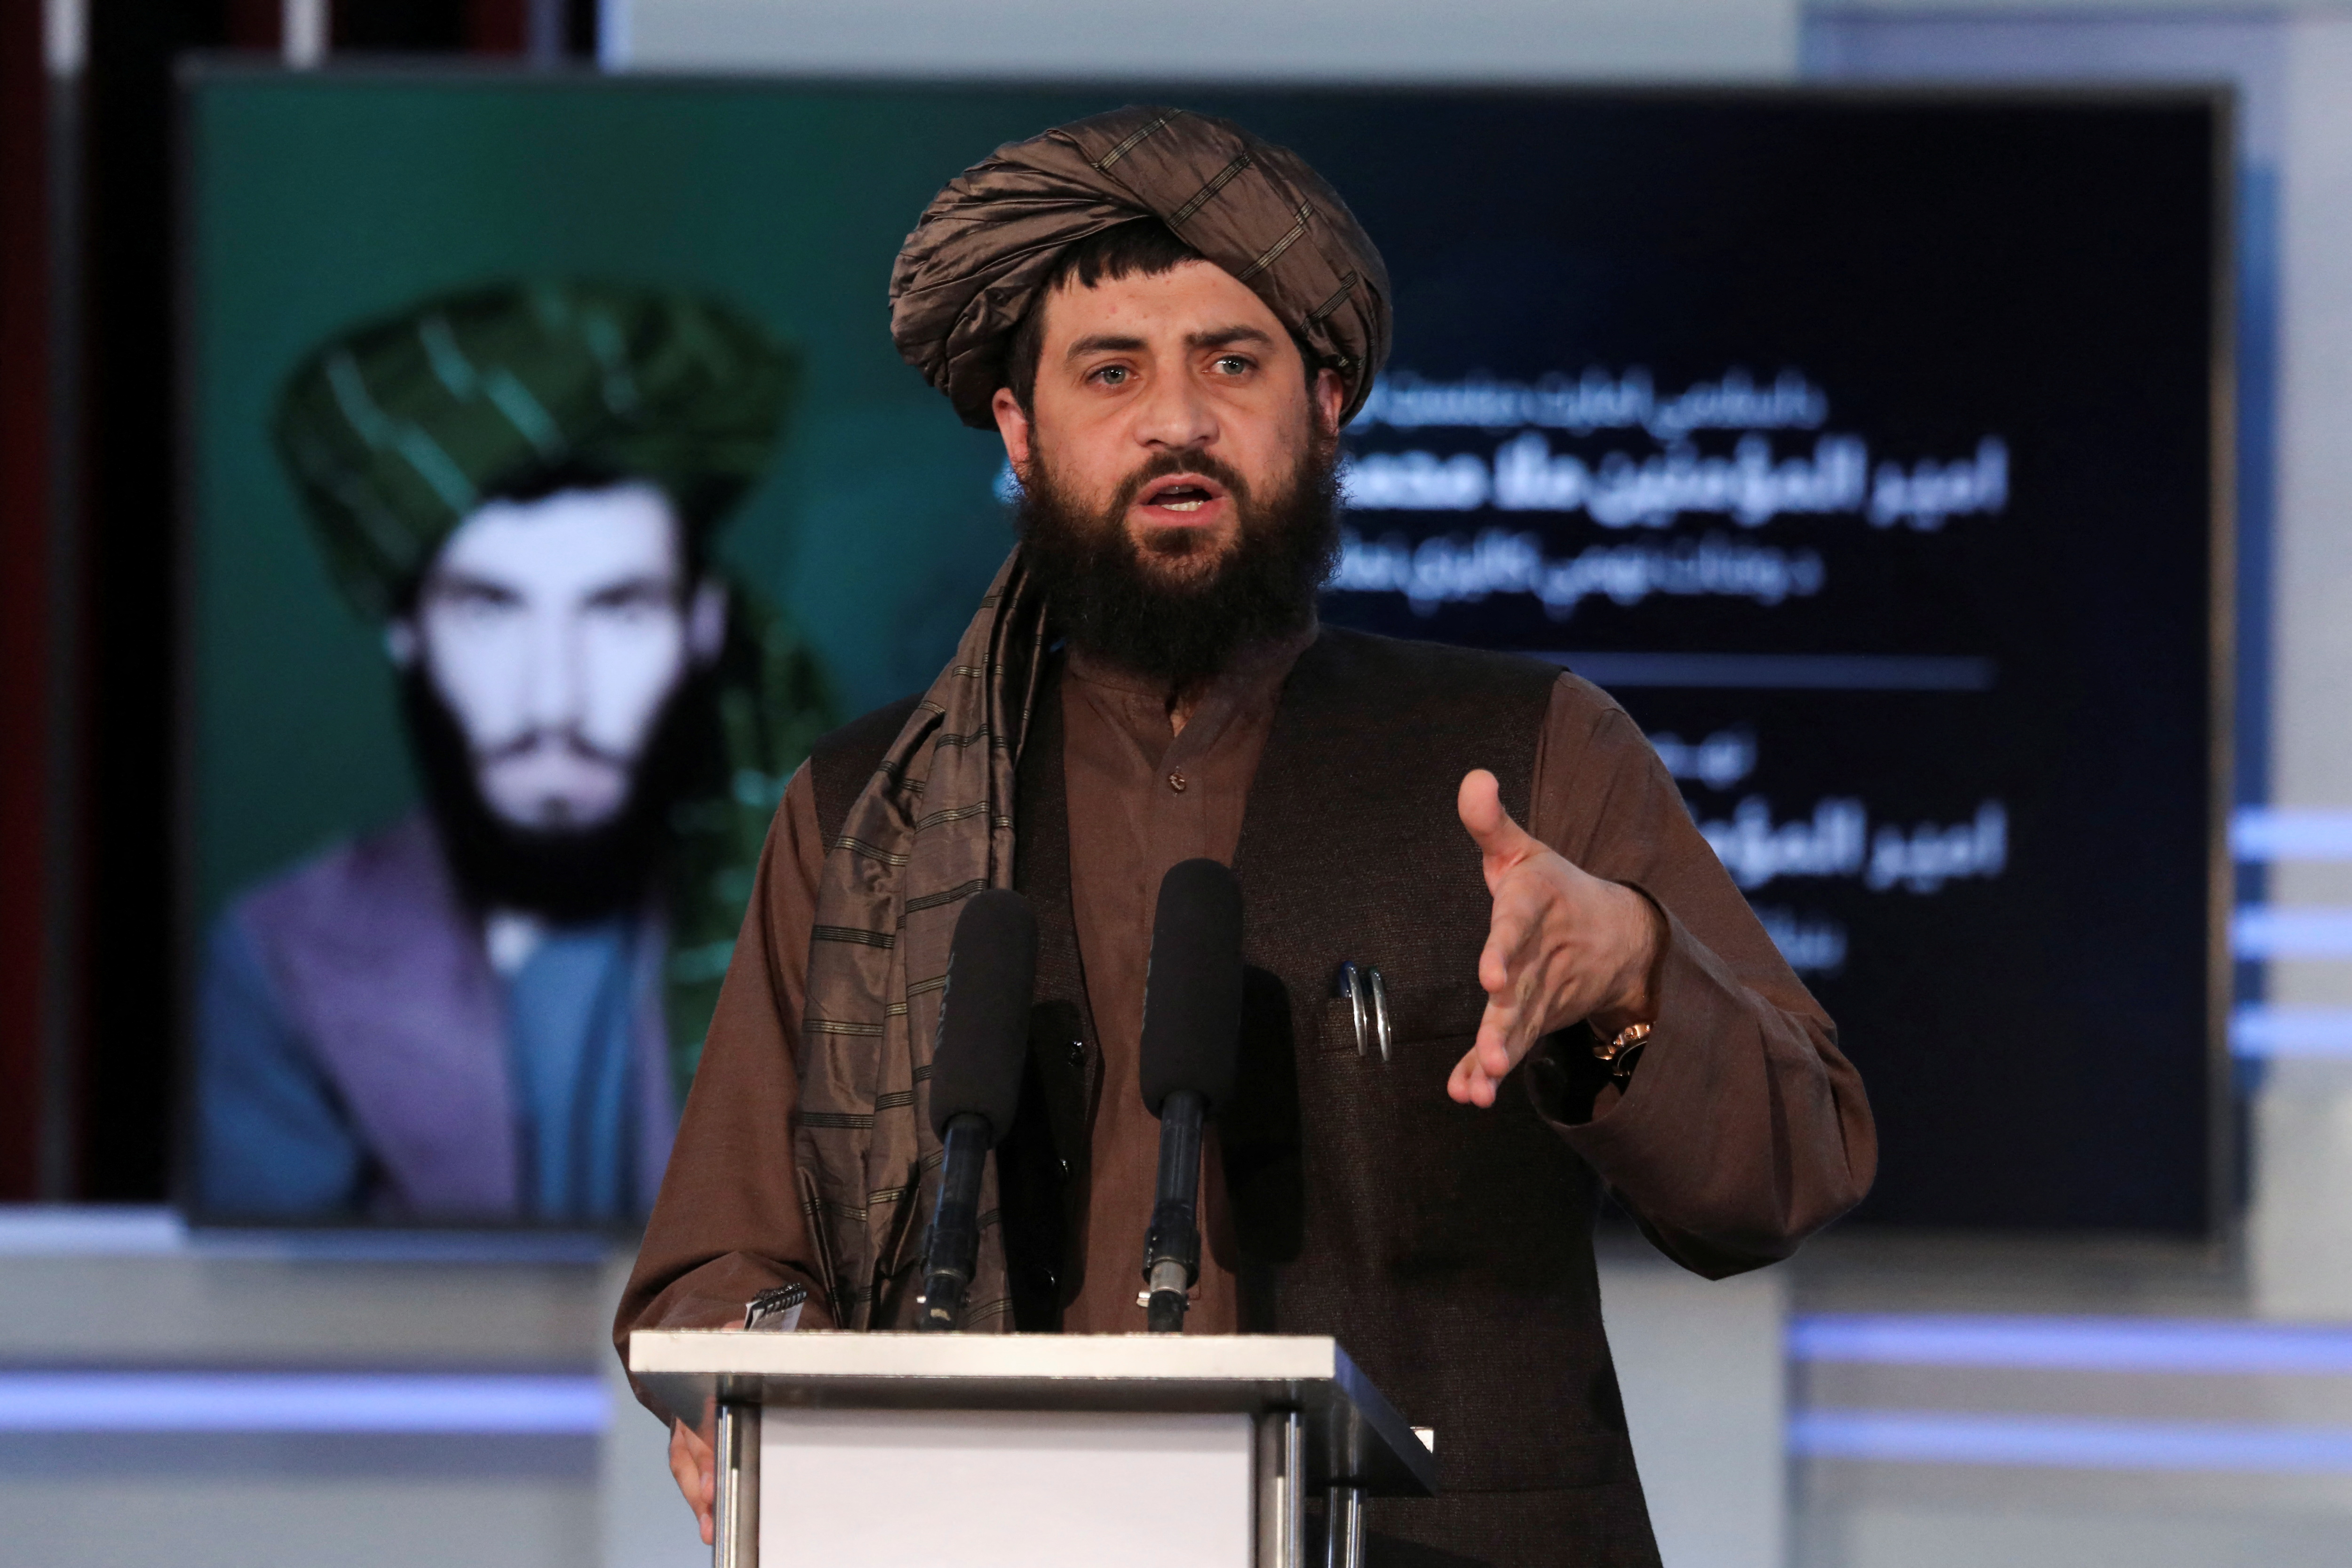 Afghan Taliban's Acting Minister of Defense Mullah Mohammad Yaqoob speaks during the death anniversary of Mullah Mohammad Omar, the late leader and founder of the Taliban, in Kabul